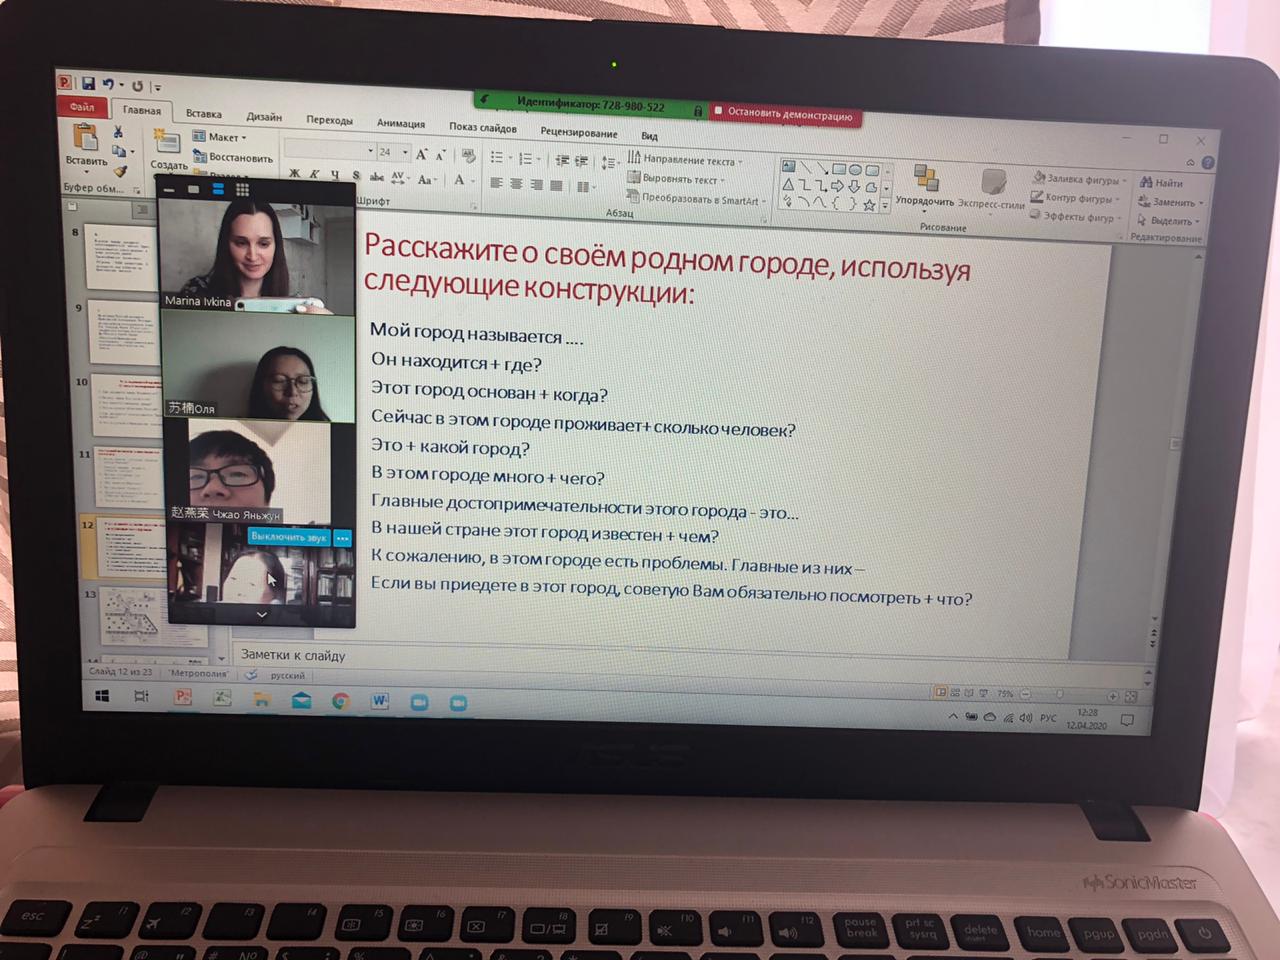 Image of a seminar on the topic “City. Golden ring of Russia”